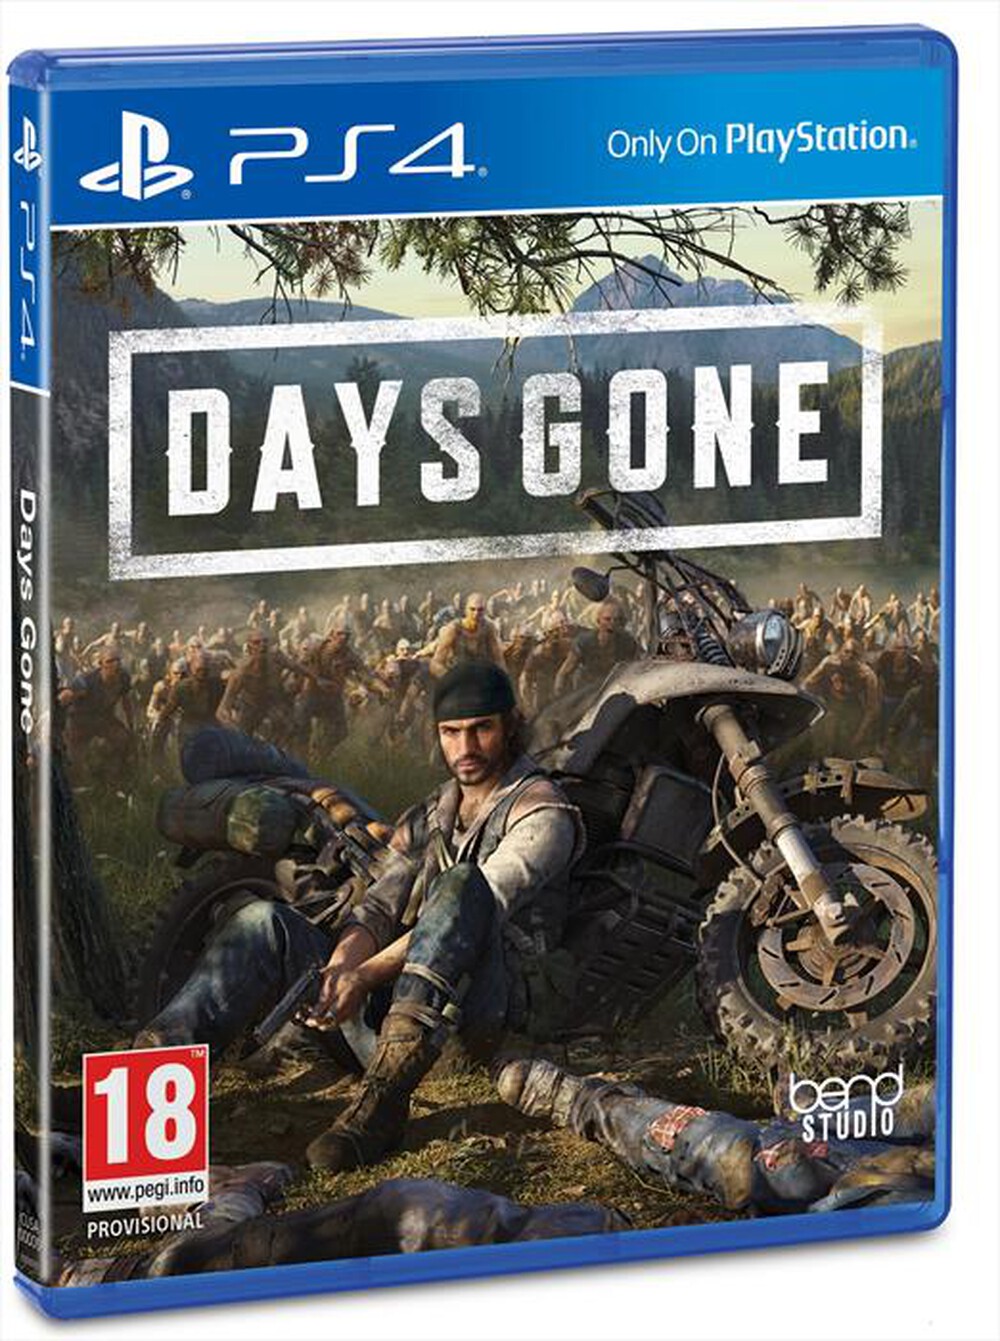 "SONY COMPUTER - DAYS GONE PS4"